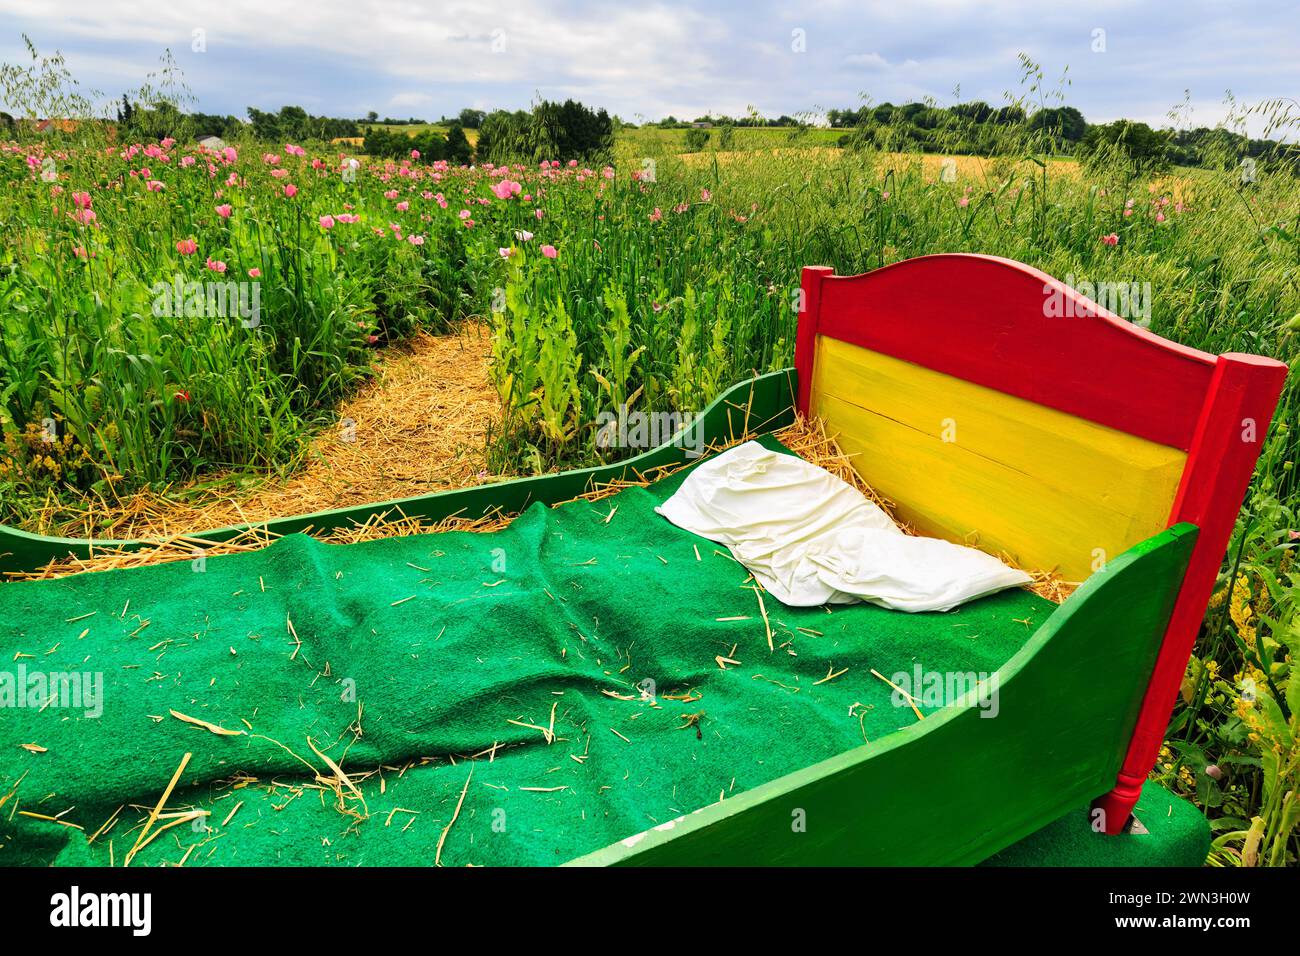 Colourful wooden bed outdoors, mattress made of straw, original hiking trail in the poppy field, symbol of fresh air, taking a break, relaxation Stock Photo